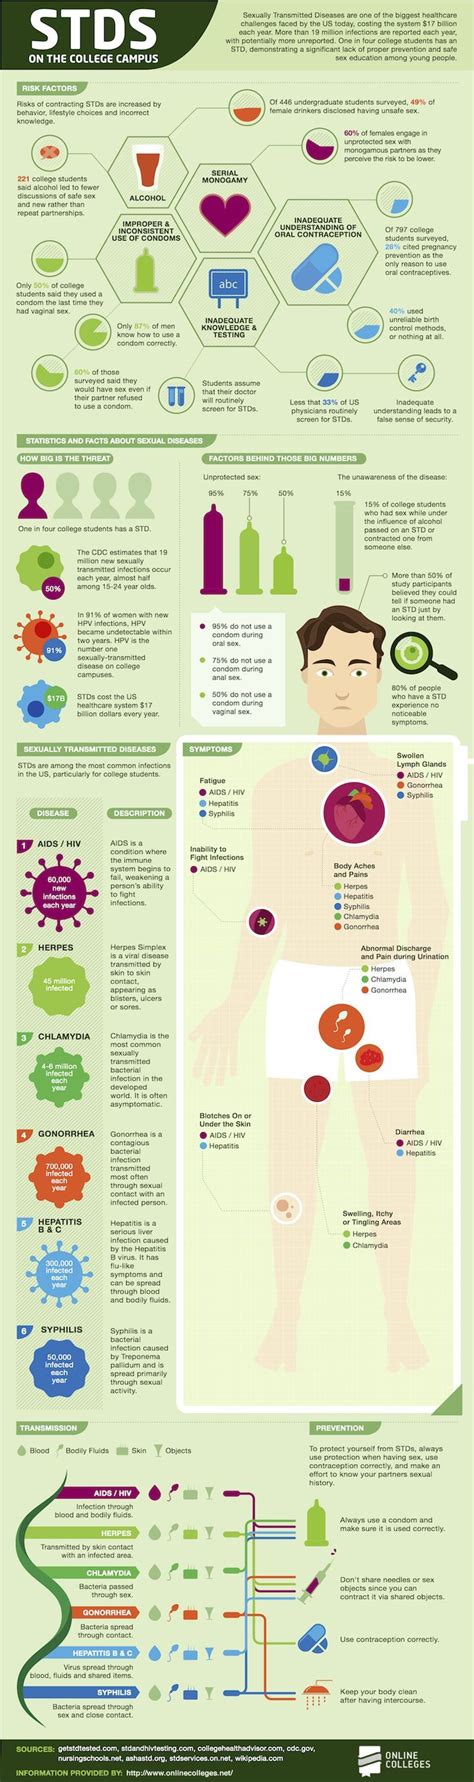 Best All About Stds Images On Pinterest Infographic Infographics